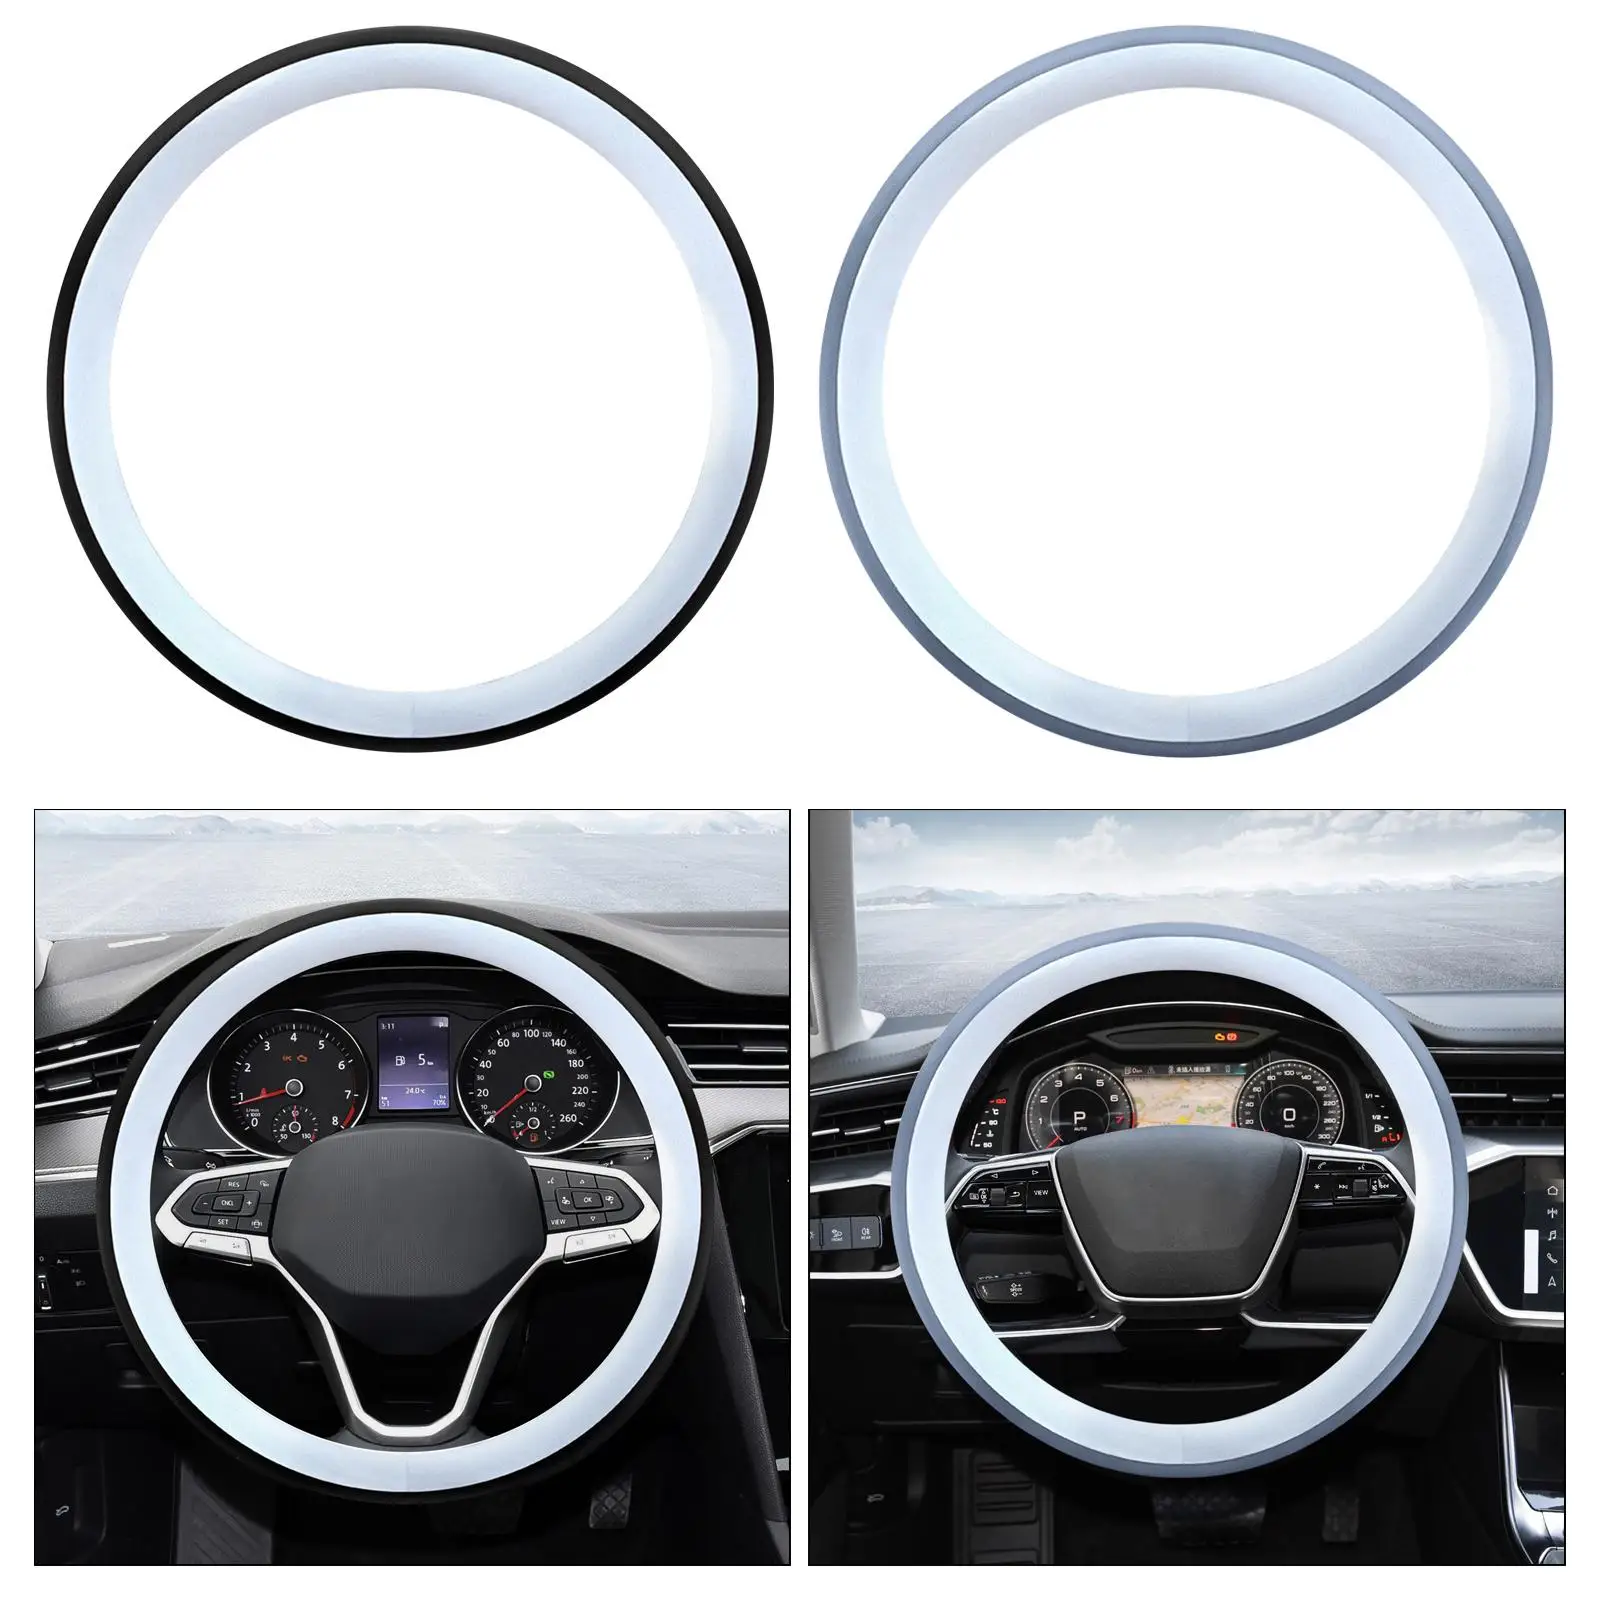 38cm Steering Wheel Cover Protector Anti Slip Breathable Universal for Suvs Trucks Interior Accessories Round Protective Cover